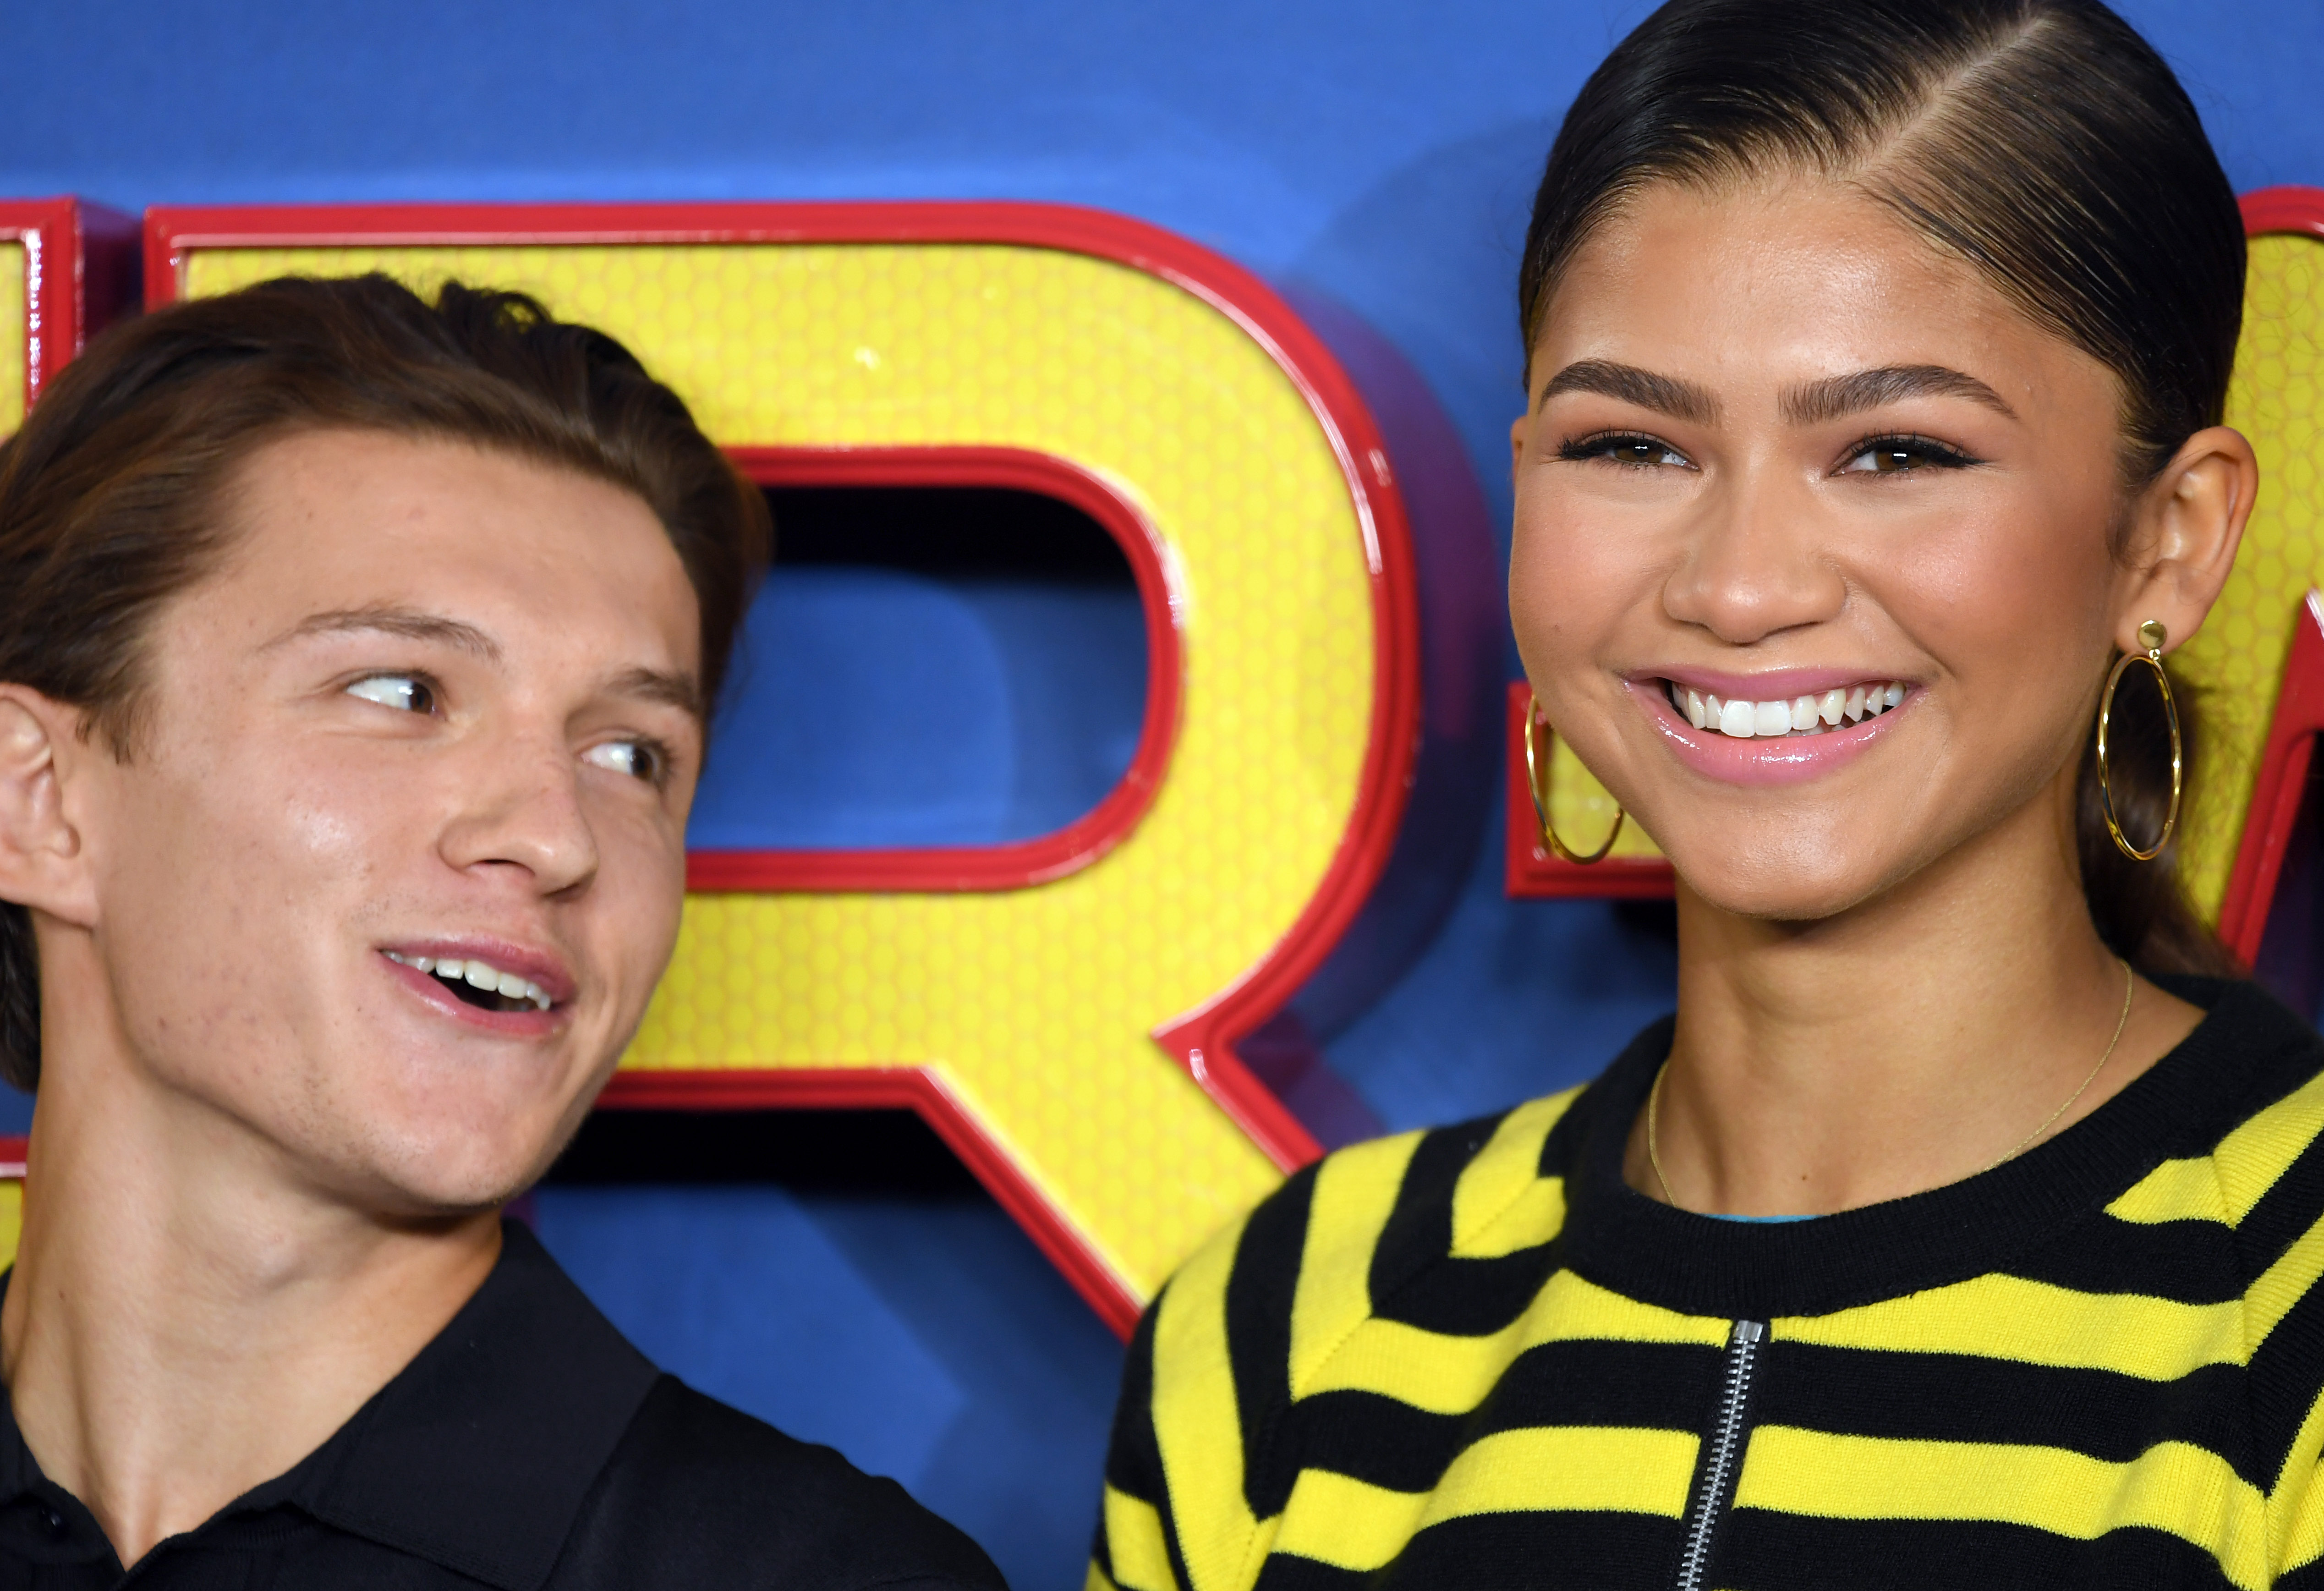 Tom Holland and Zendaya attend the "Spider-Man: Homecoming" photocall at The Ham Yard Hotel.